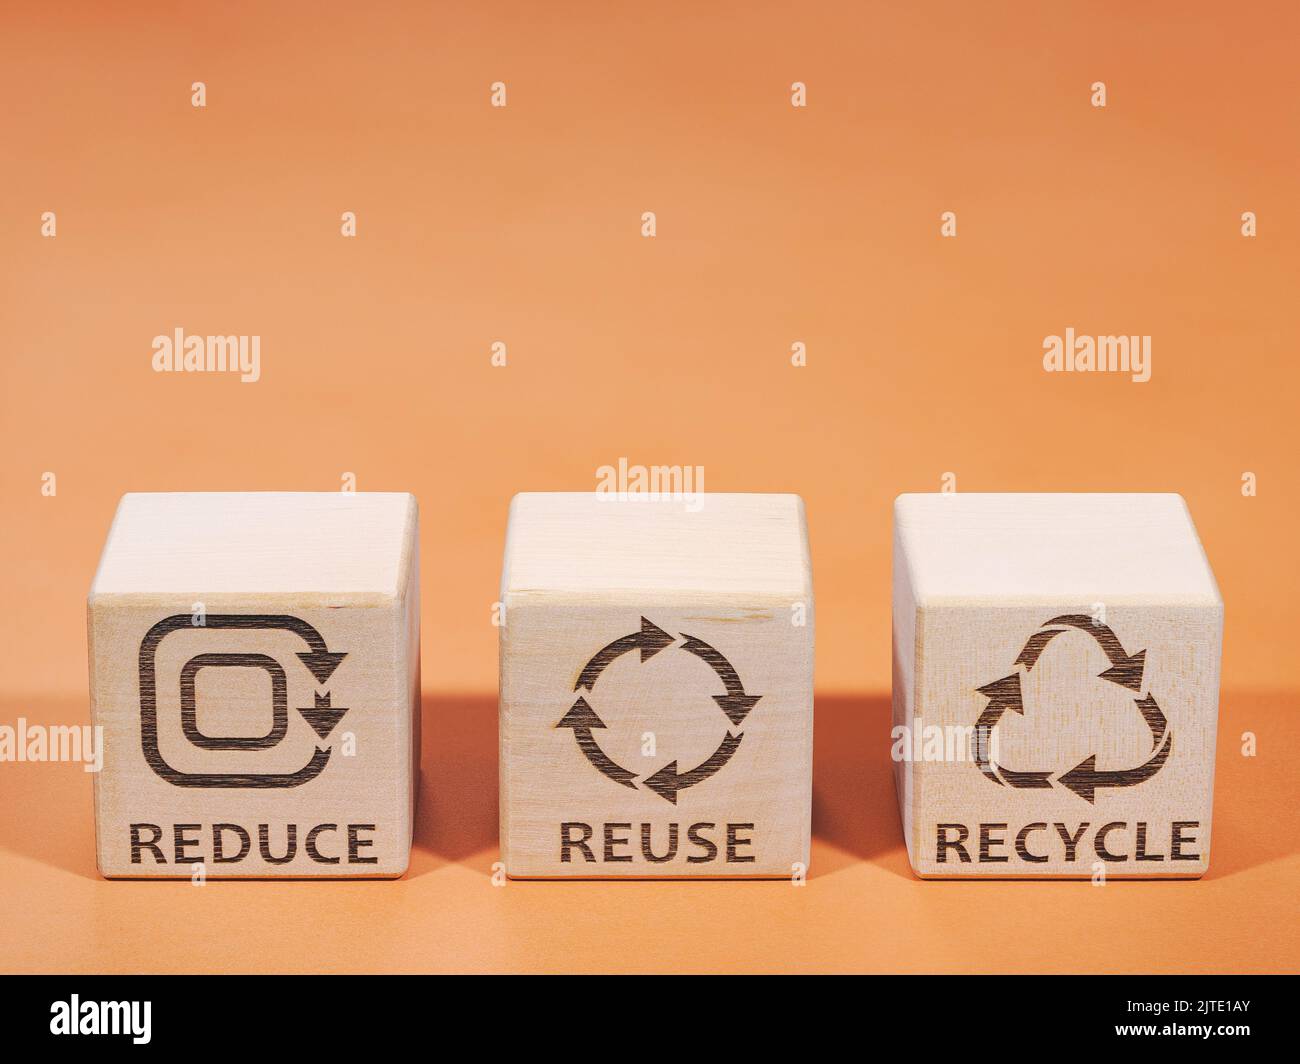 REDUCE, REUSE and RECYCLE symbols as a resource consumption management concept Stock Photo